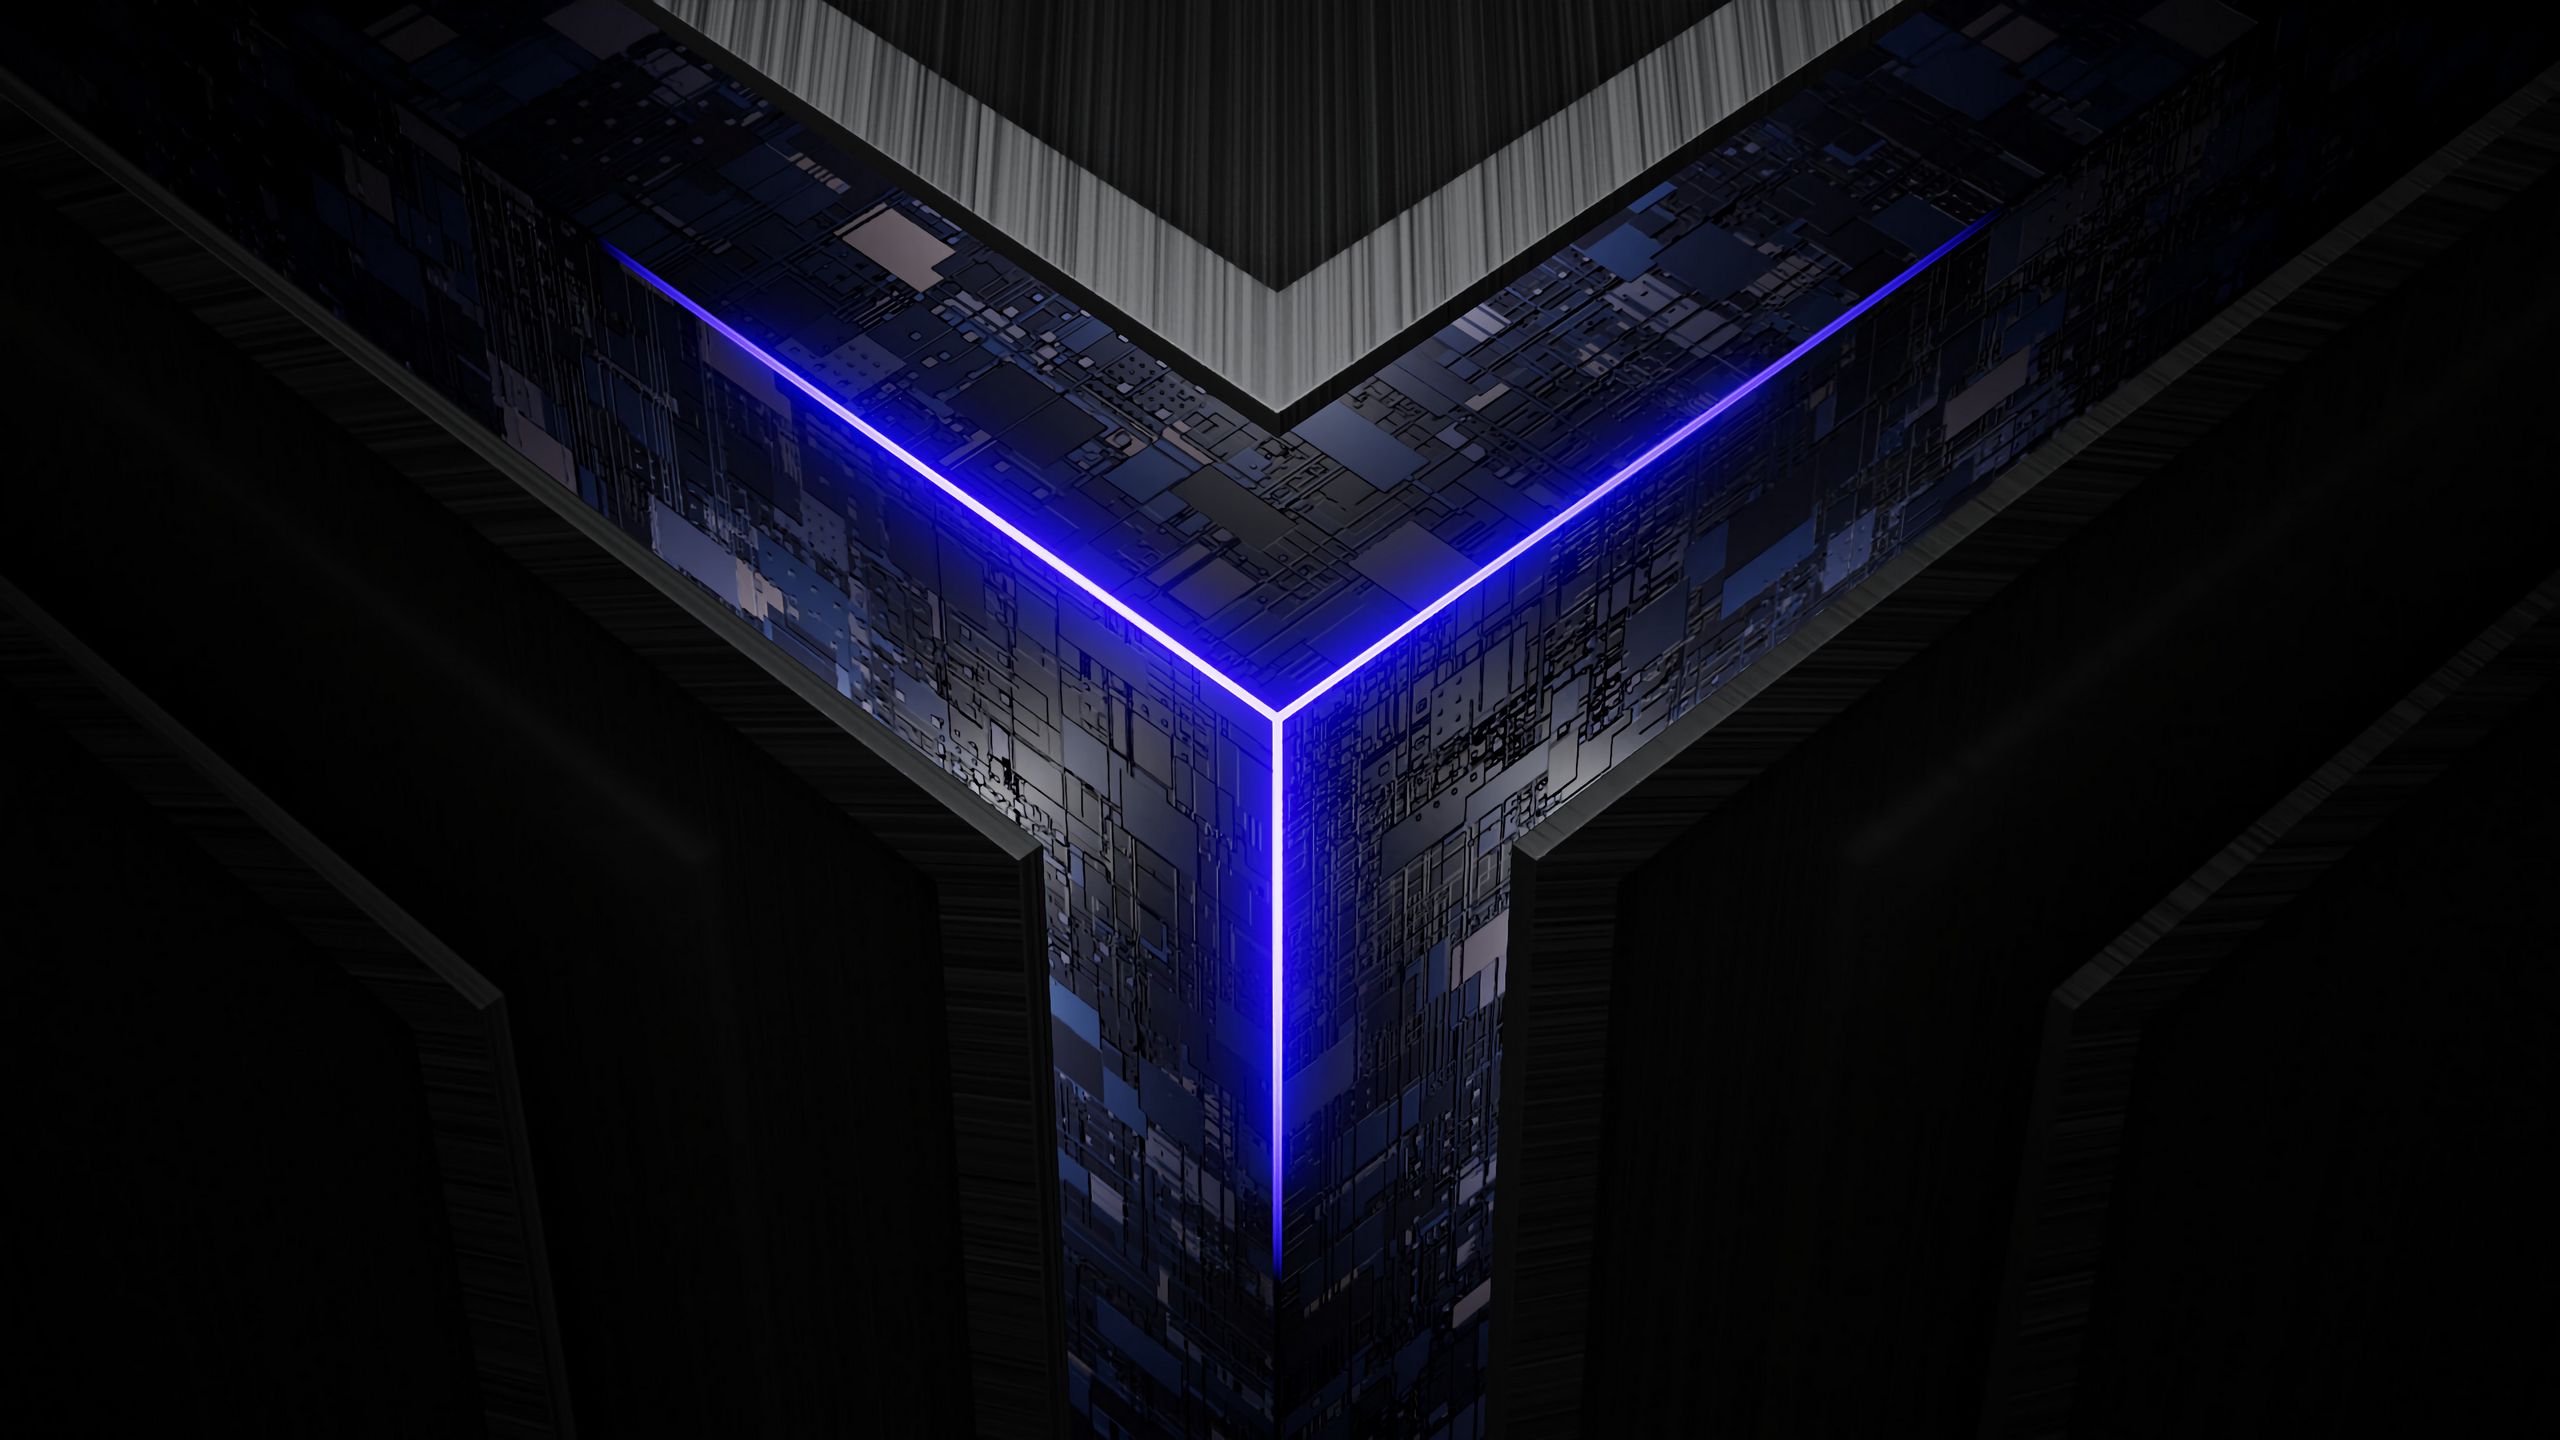 Download wallpaper 2560x1440 cube, circuit, chips, glow, neon widescreen  16:9 hd background